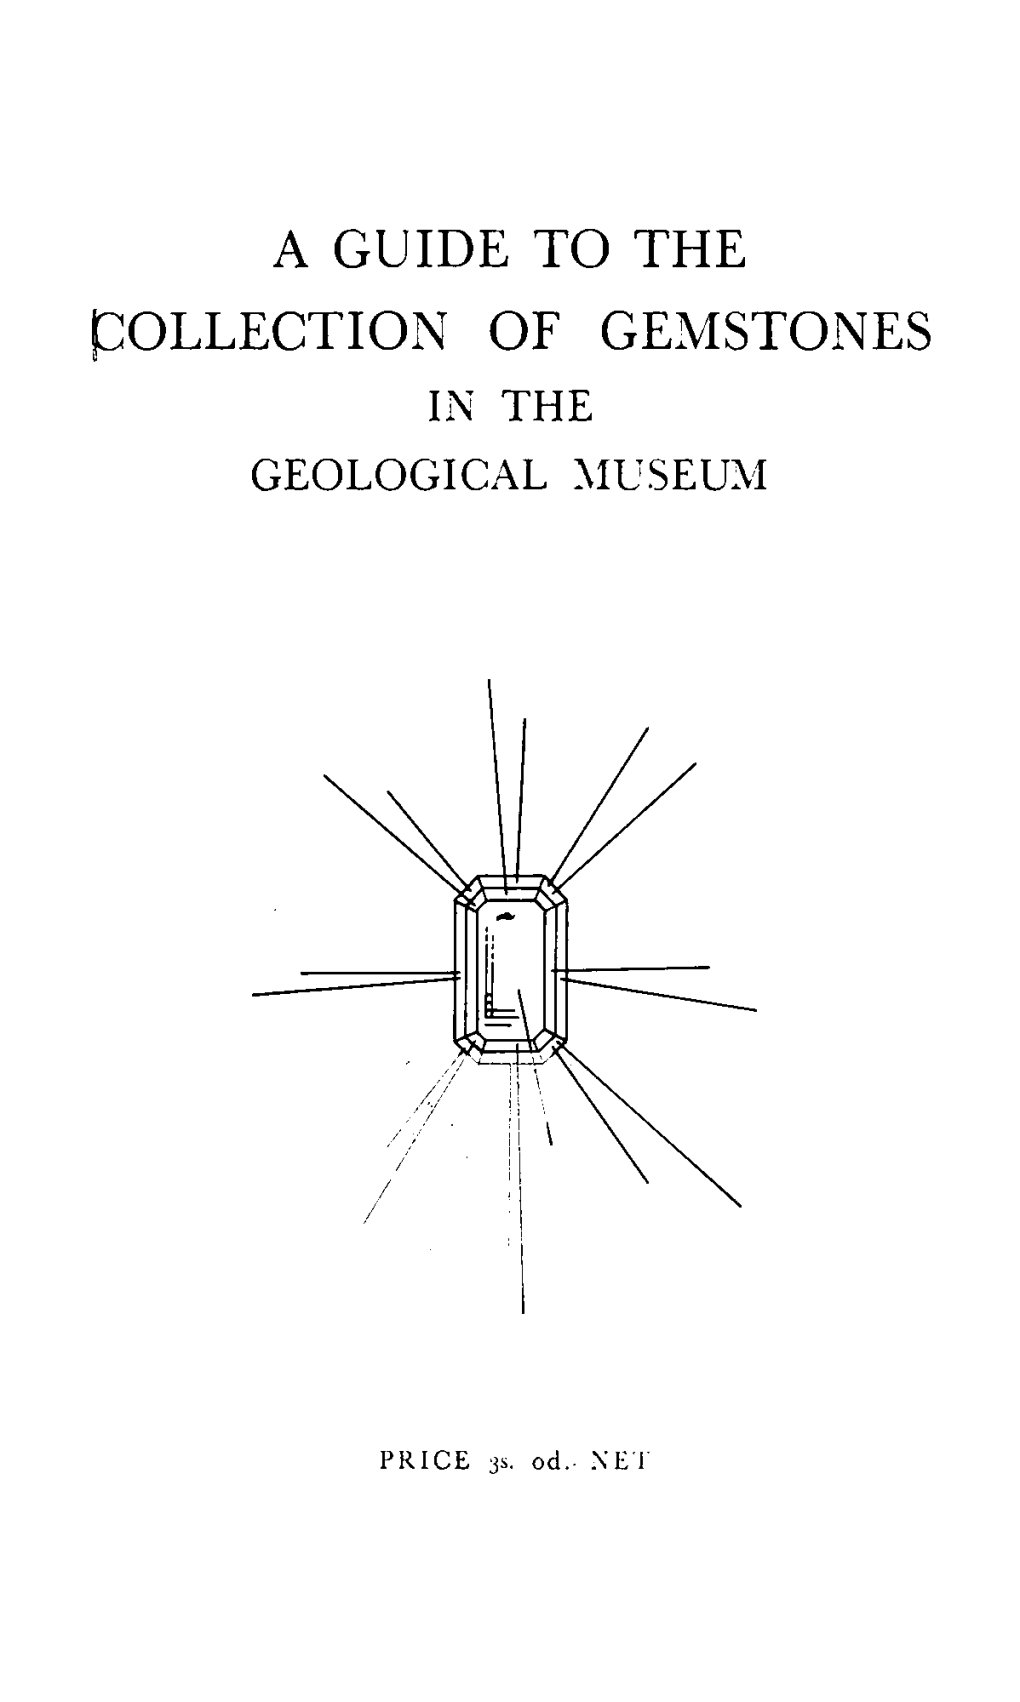 A Guide to the Collection of Gemstones " in the Geological ::\Ivseu\,1